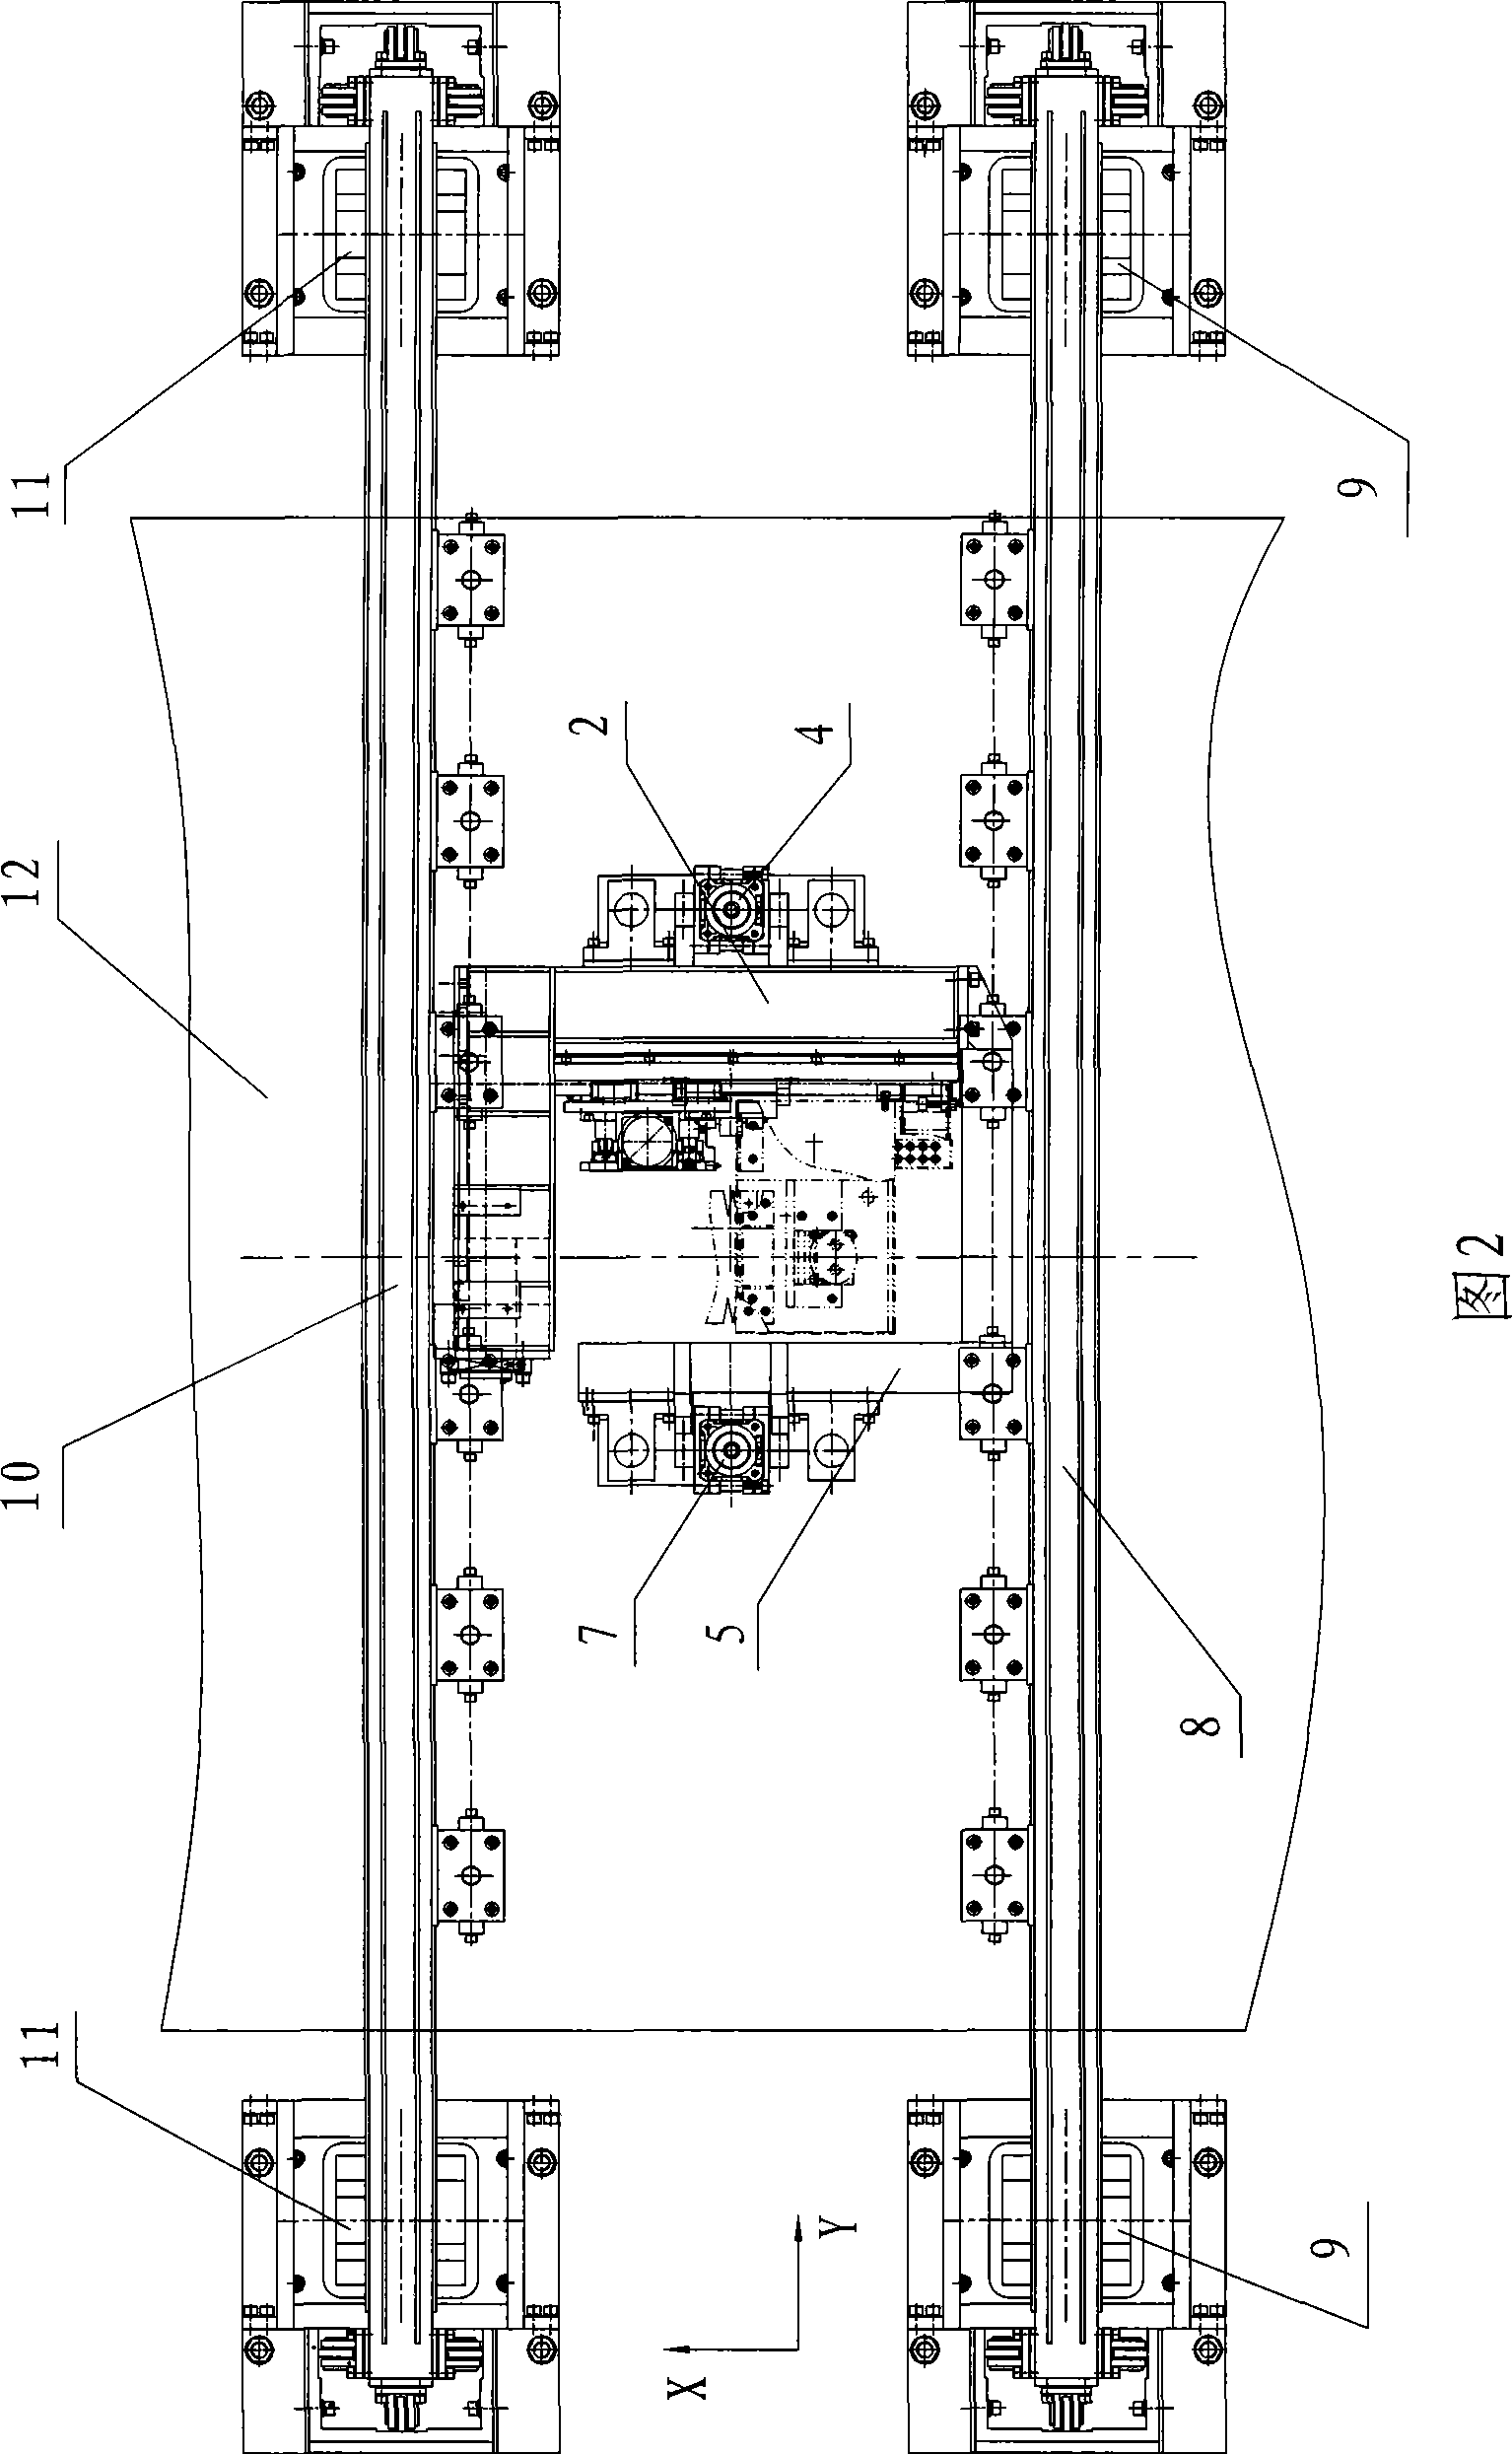 Compressing apparatus for laser beam welding